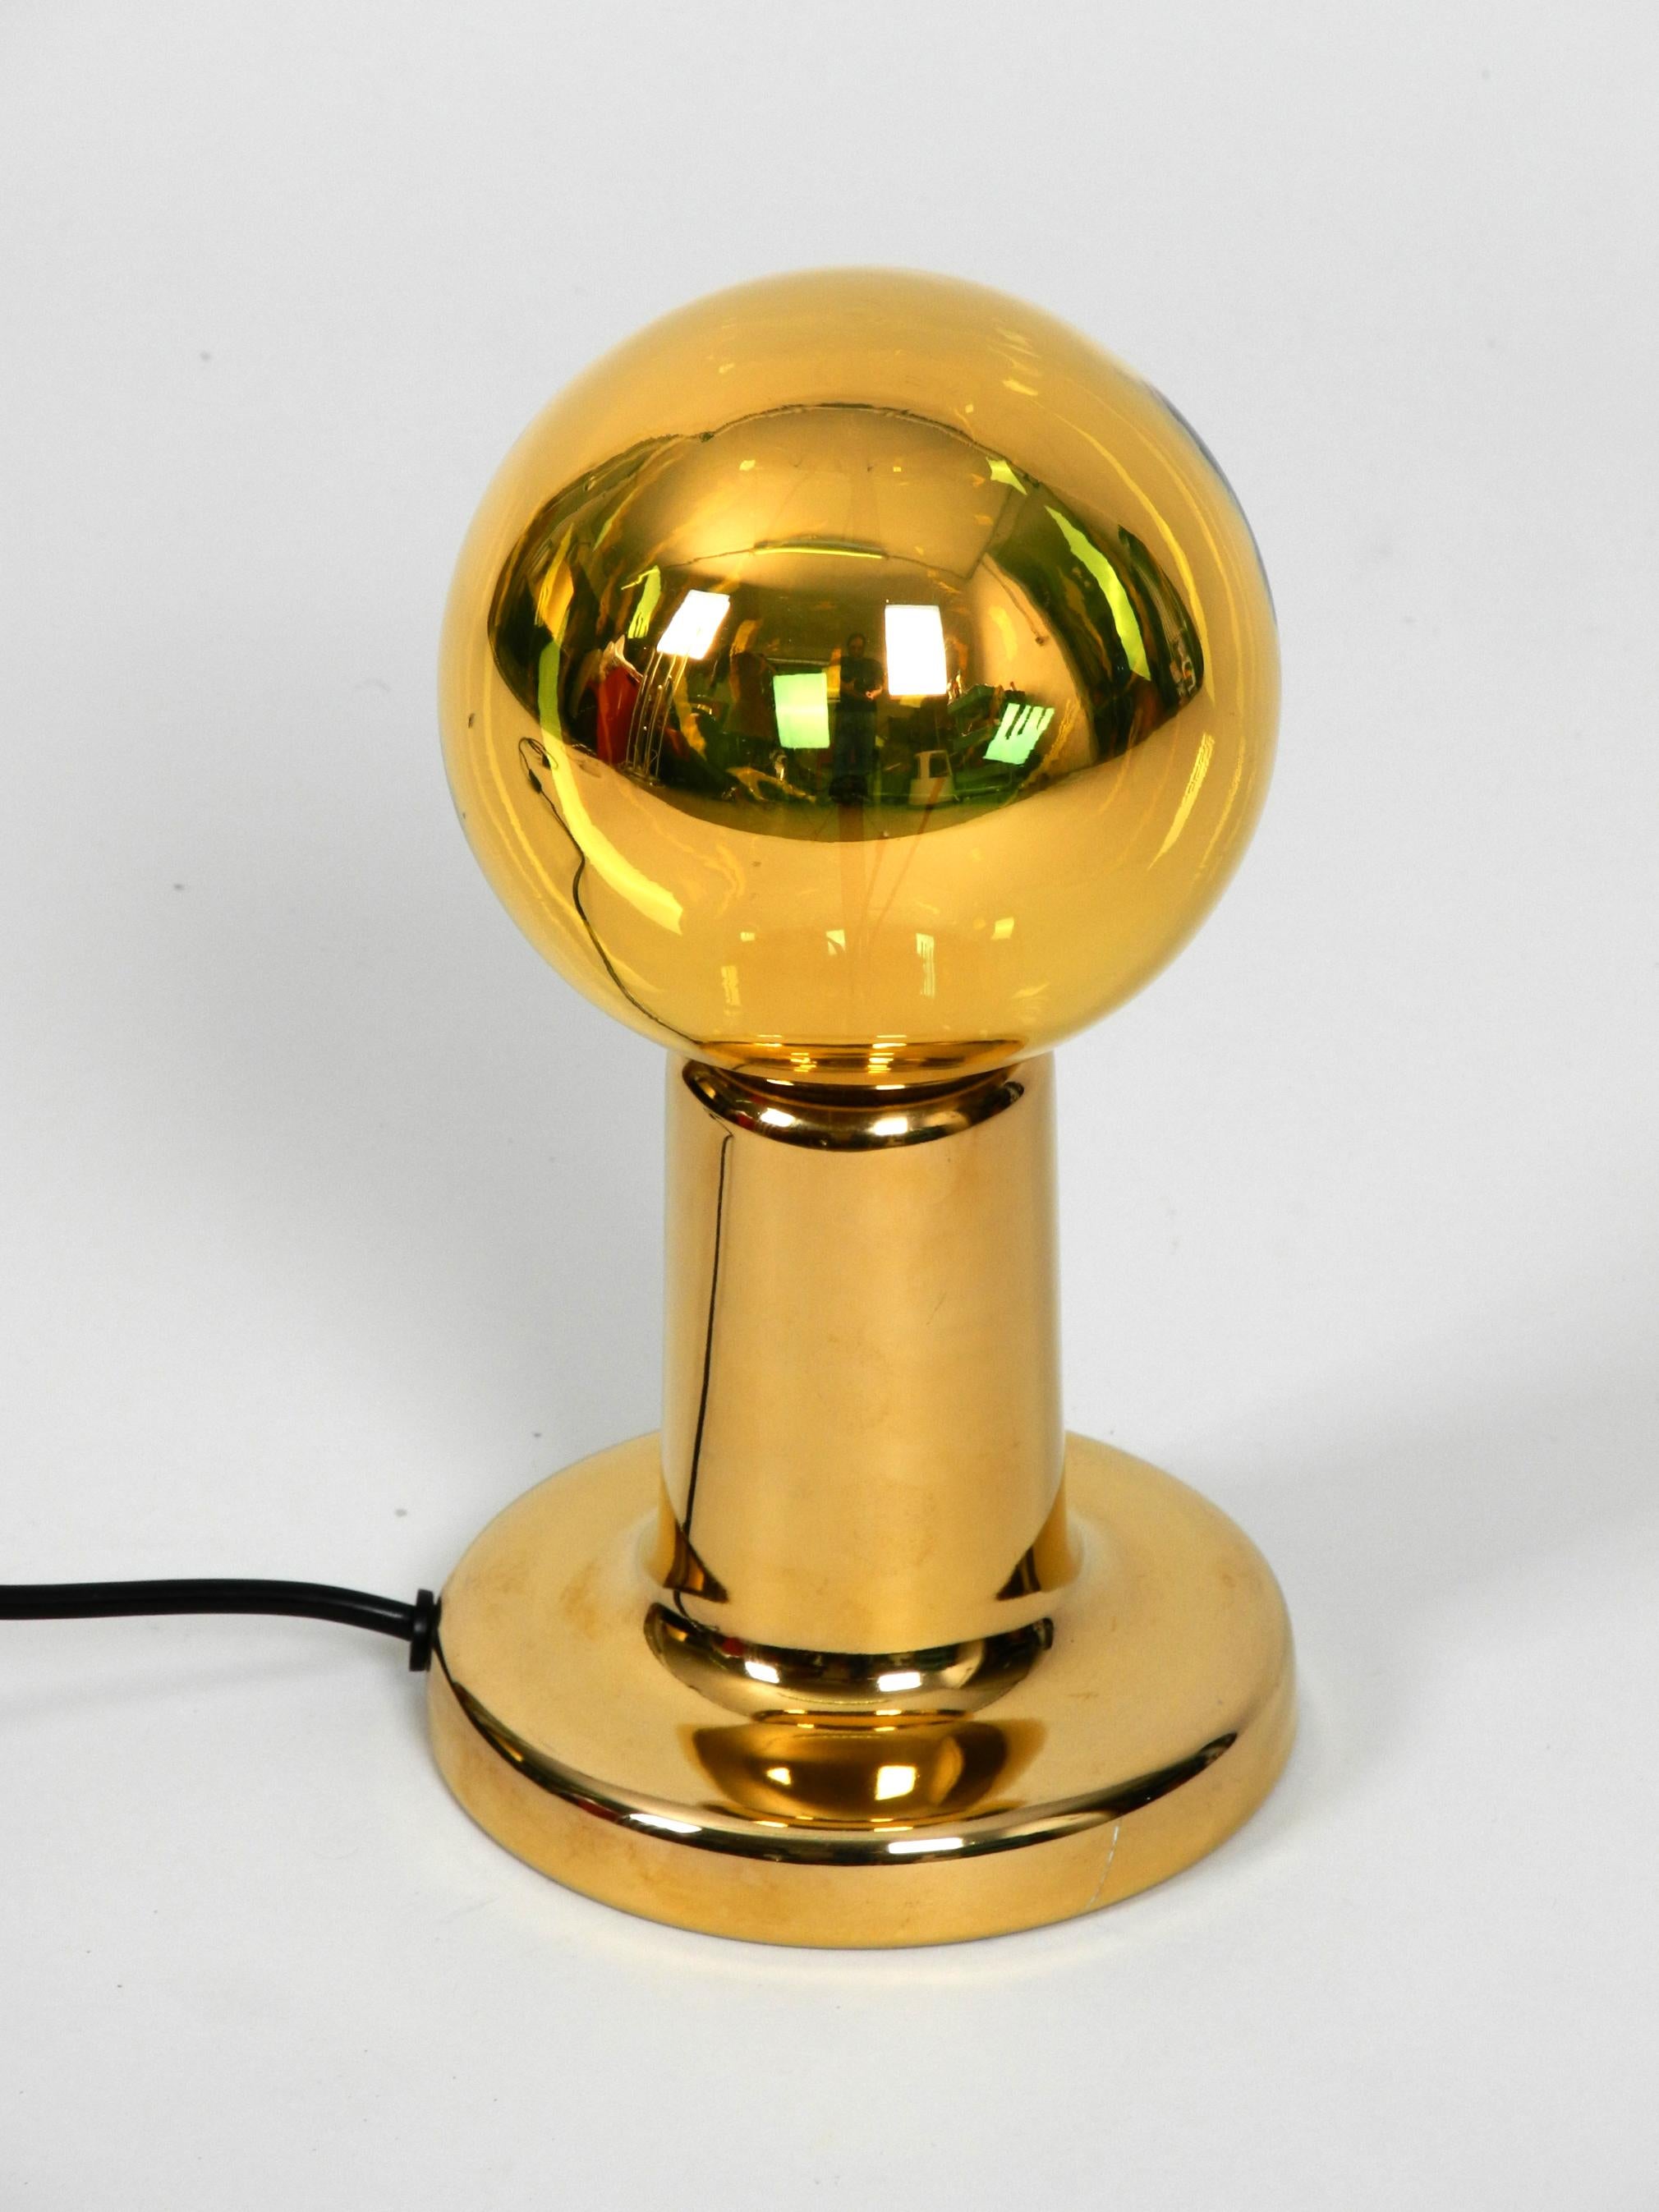 Very rare original 1970s Pop Art Phillips NTD ceramic table lamp 
in high glossy golden color.
Great Minimalist design with the big golden mirrored light bulb.
Very good vintage condition without signs of wear. 
Only a small paint scratch on the